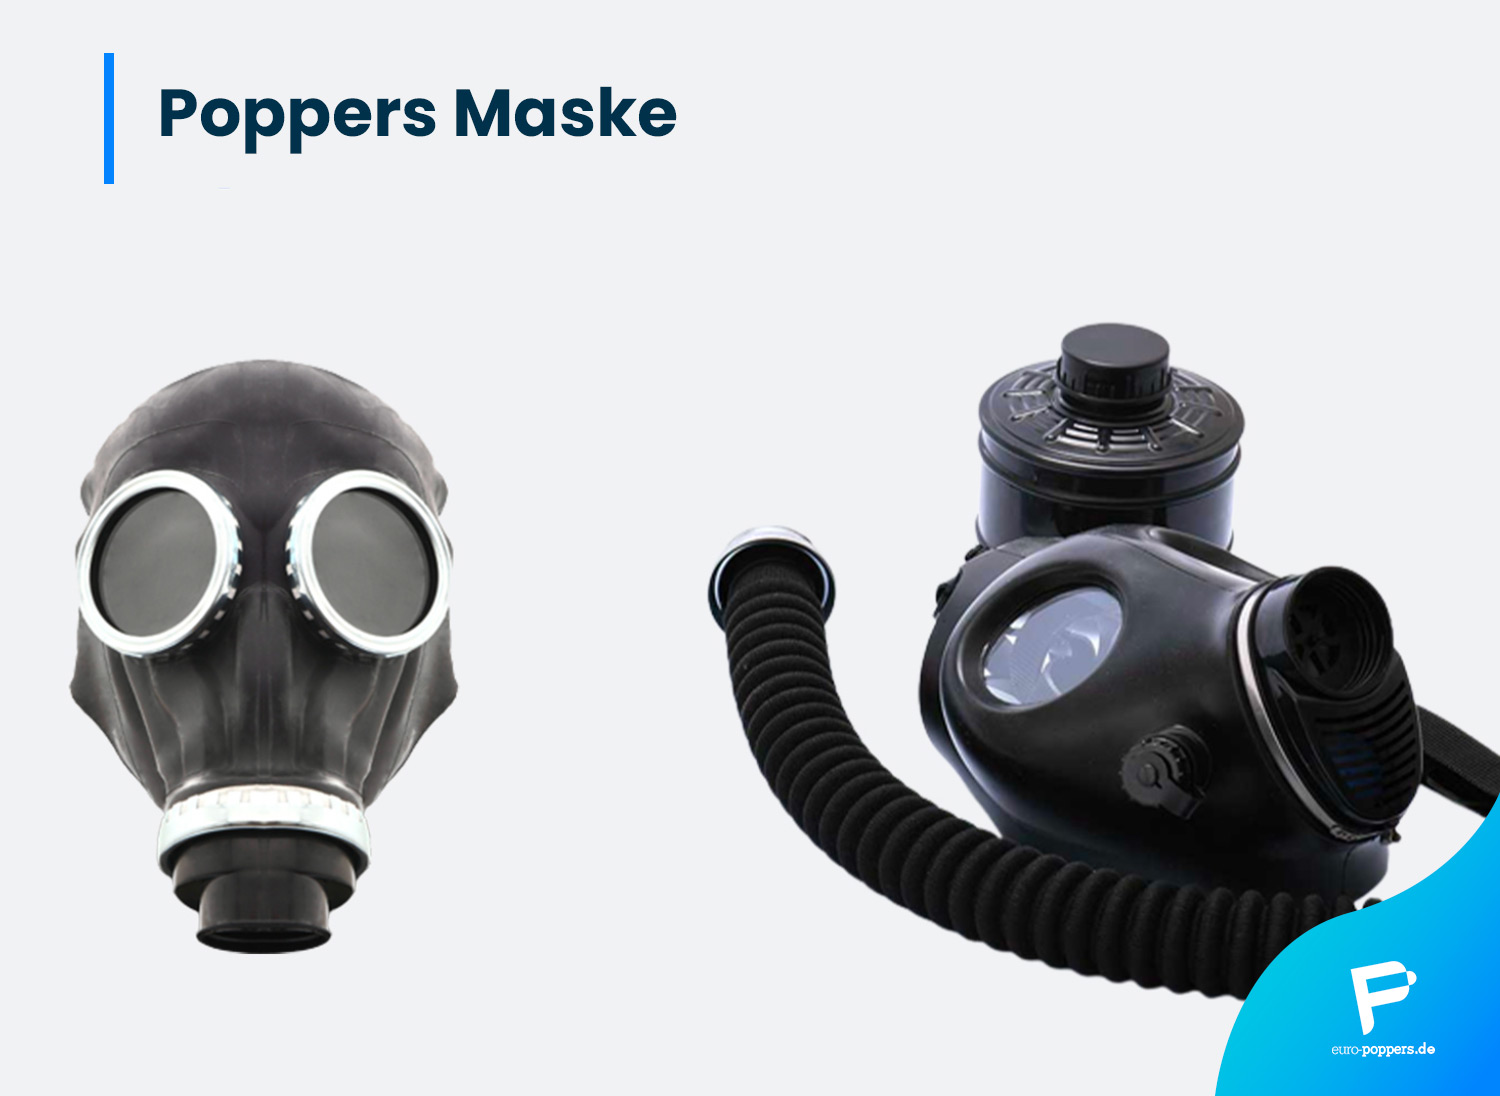 You are currently viewing Poppers Maske – das neue Accessoire für Poppers